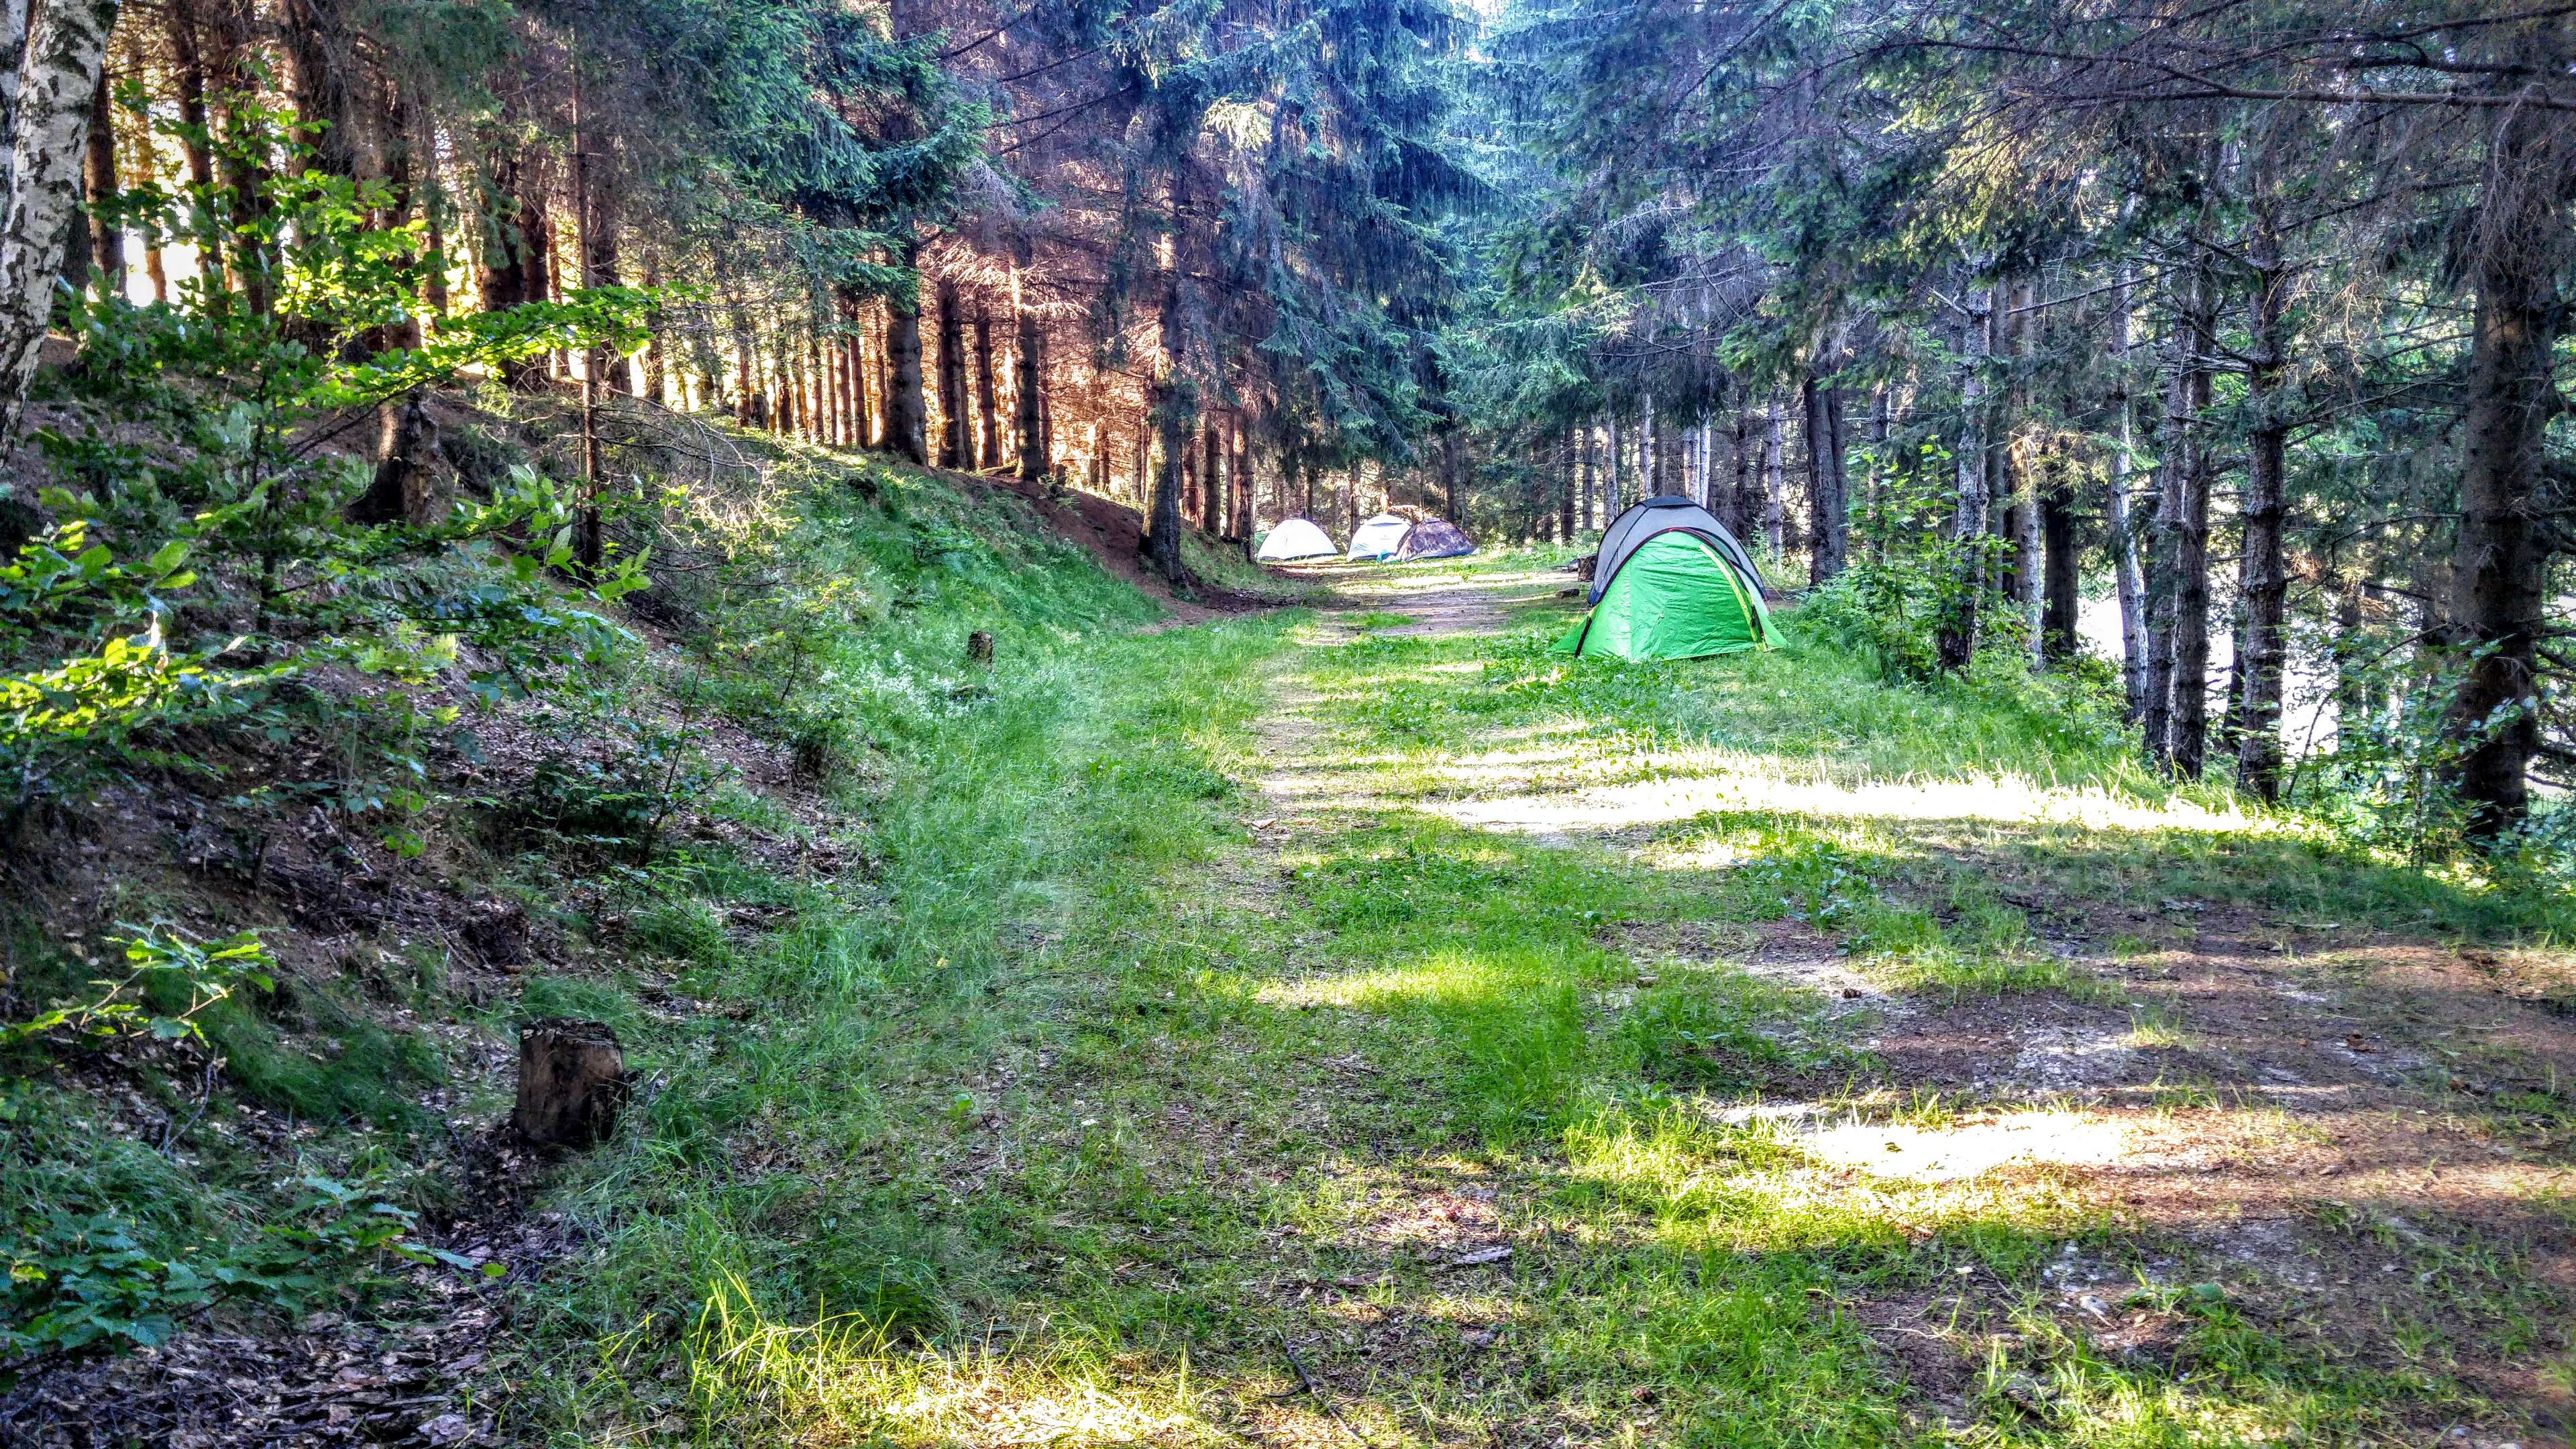 Forest Camping Images  Free Download on Freepik